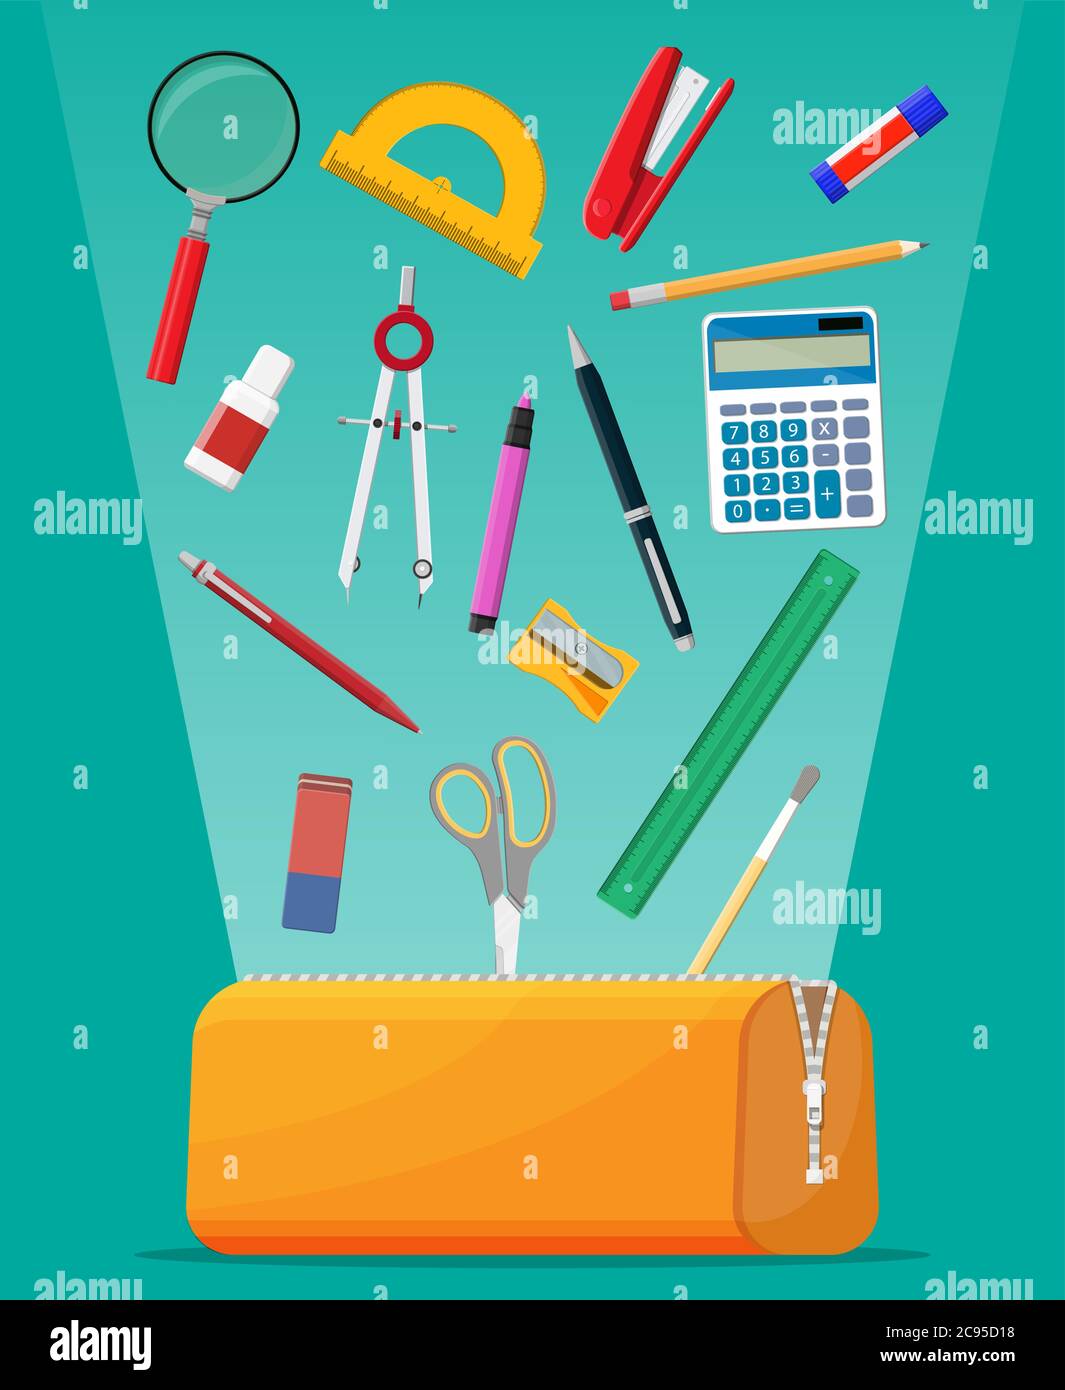 Open Pencil Case With Zipper Full Of Stationery Items Blue Bag With Supplies Back To School Concept Pen Ruler Calculator Eraser Scissors Brush Stapler Cartoon Flat Vector Illustration Stock Vector Image